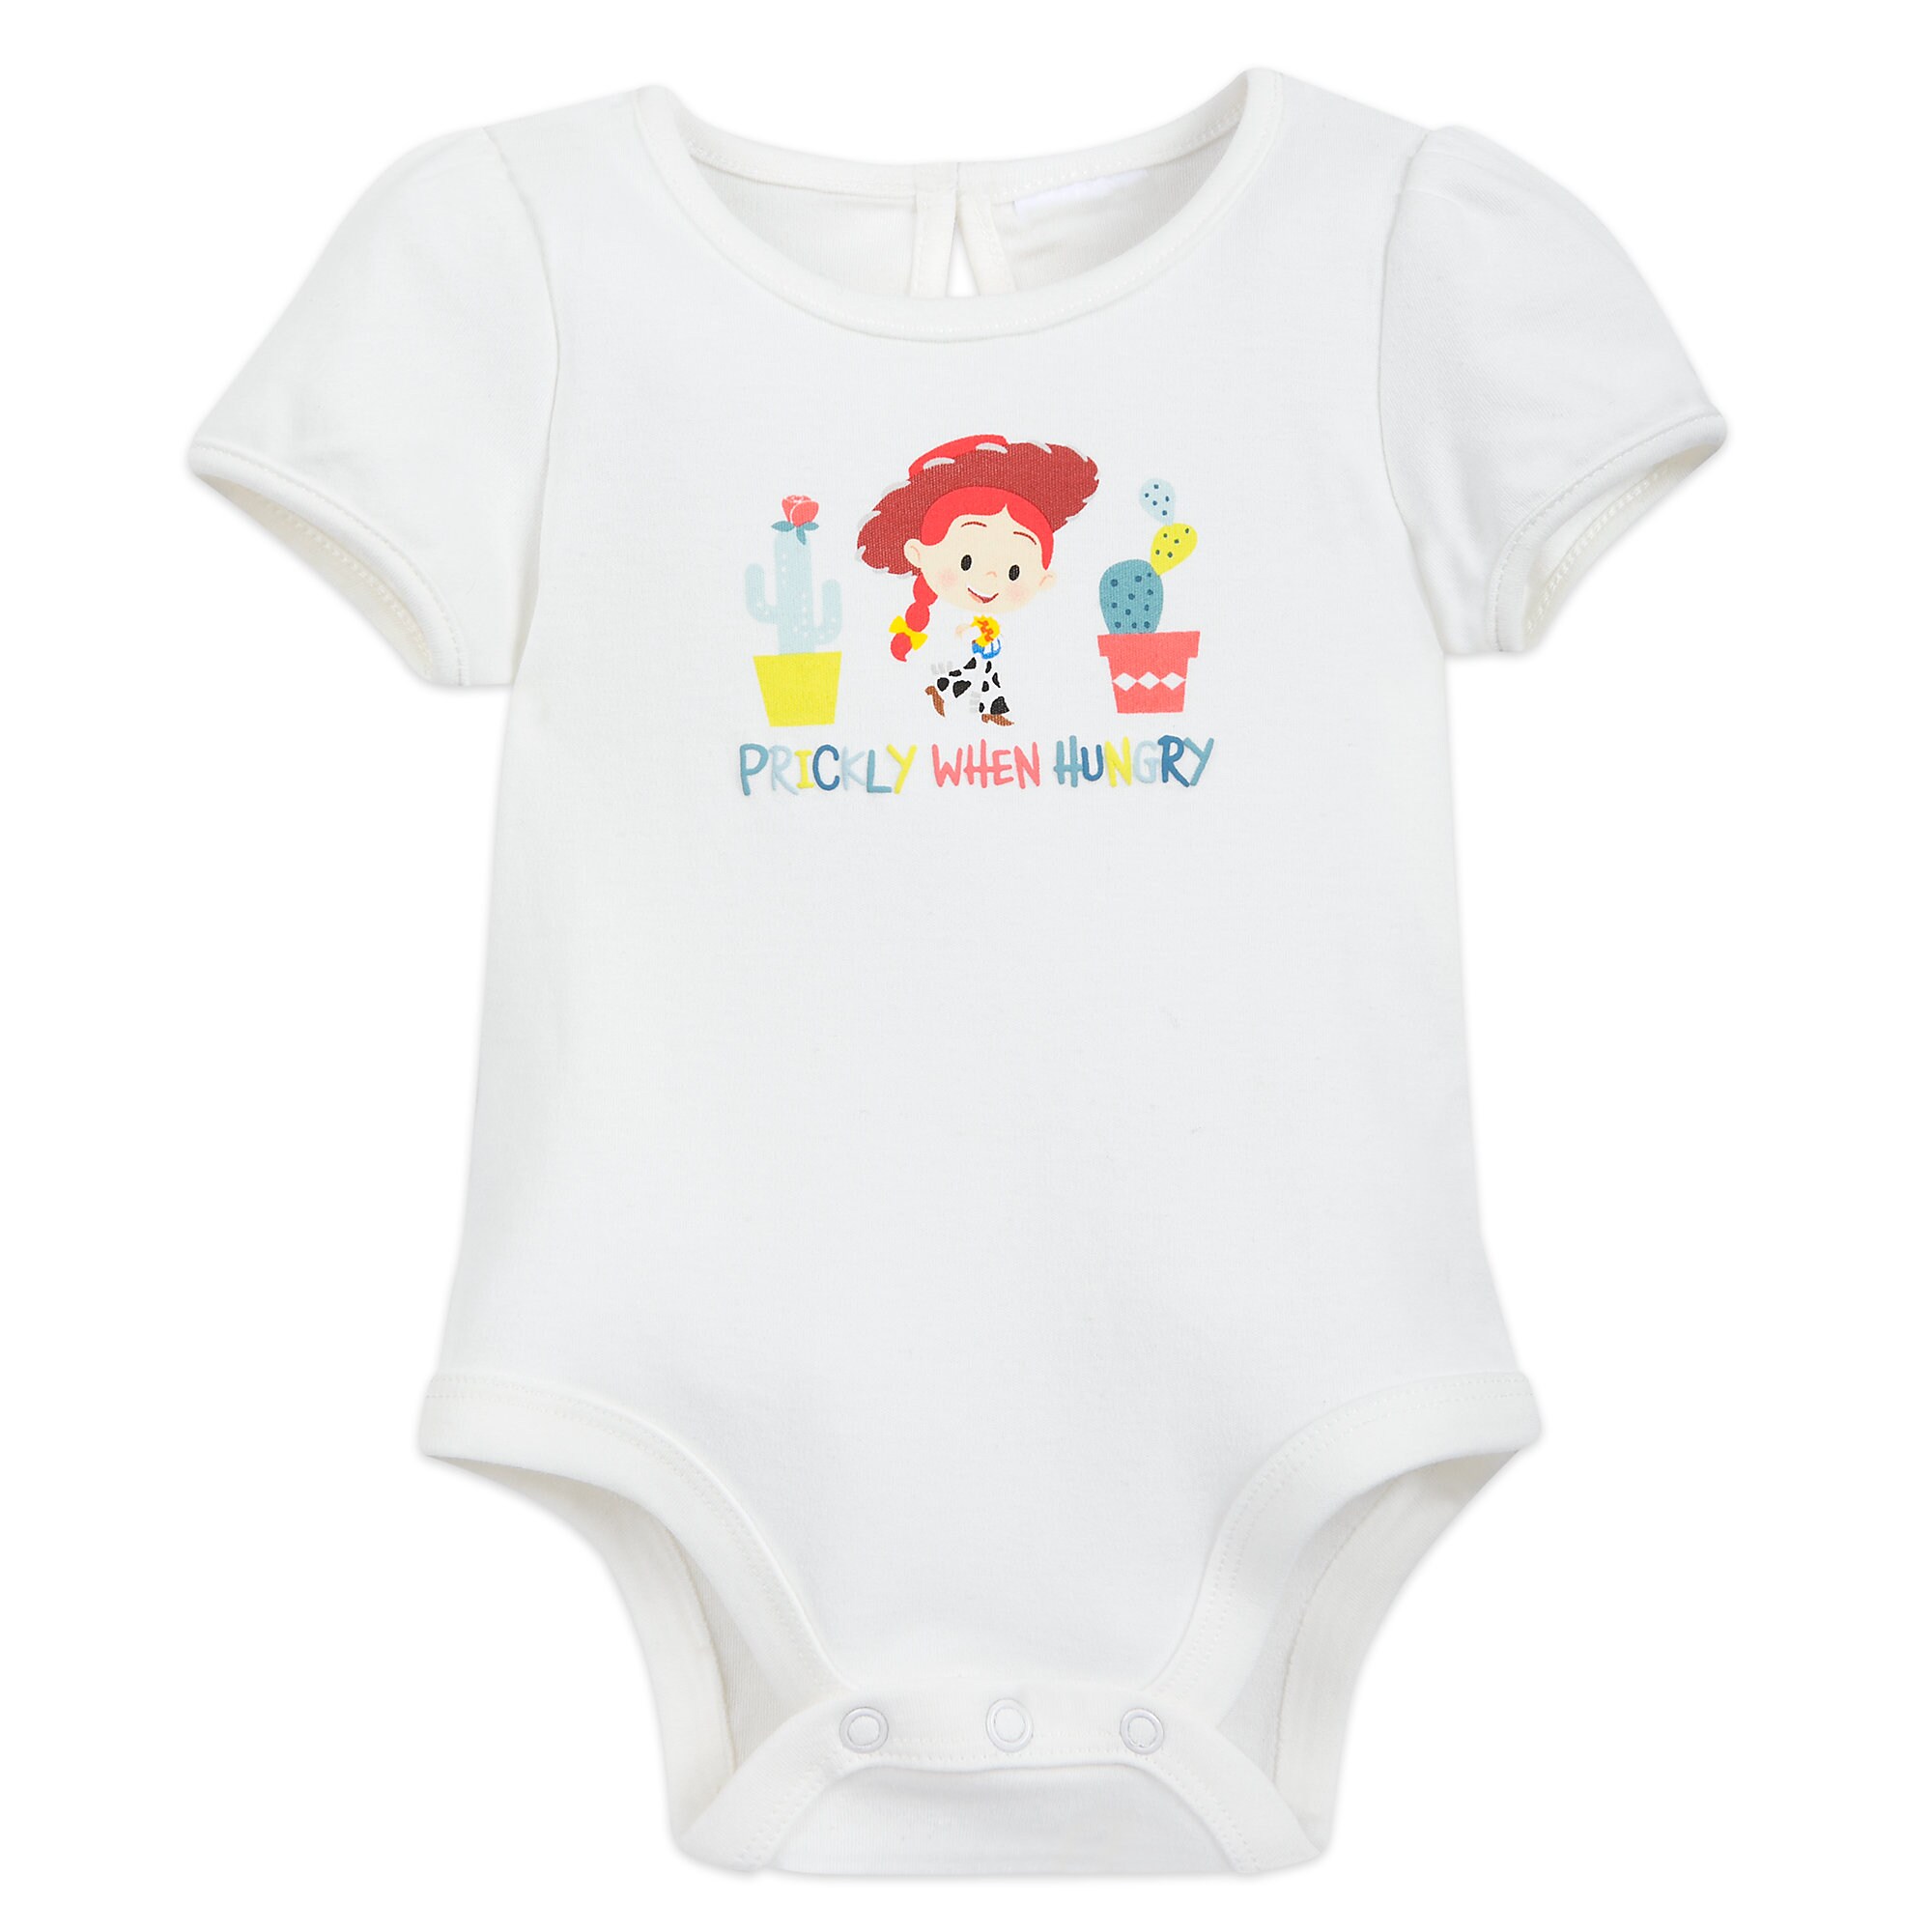 Jessie Bodysuit and Jumper Set for Baby